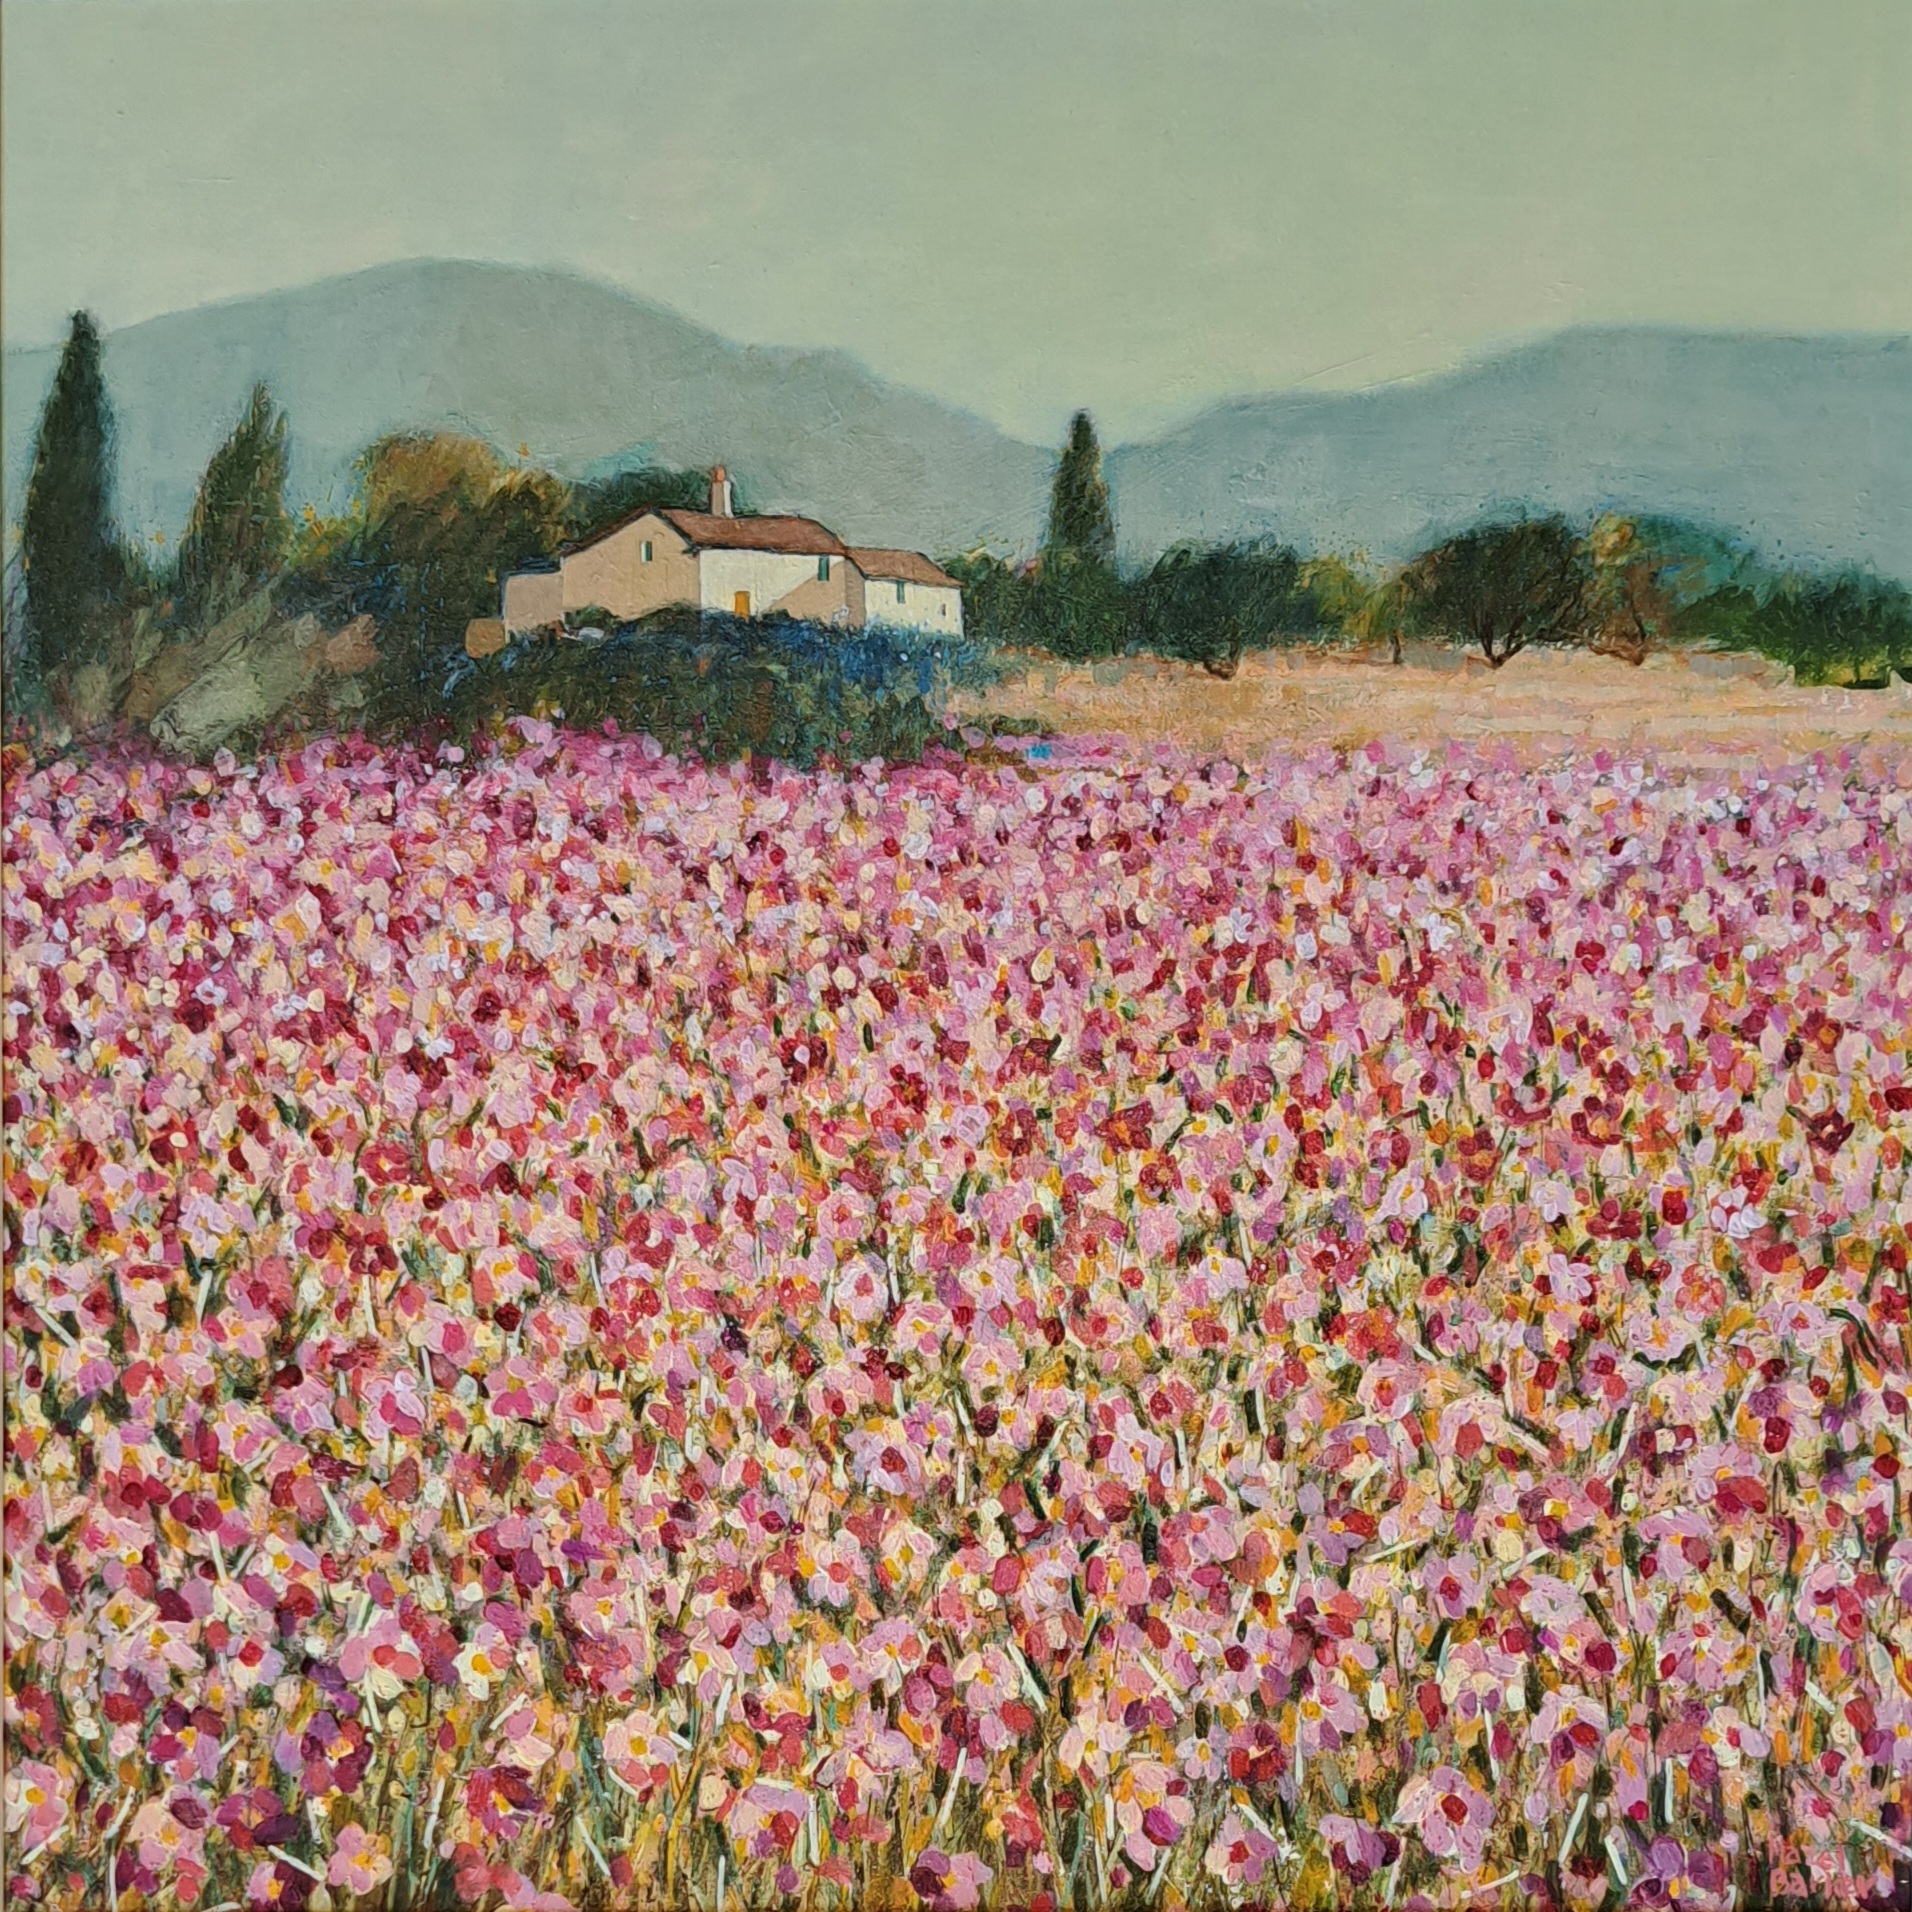 Hazel Barker Flowery Pink Meadow painting colourful pink floral field painting with magenta flowers in Mediterranean landscape scene with frame